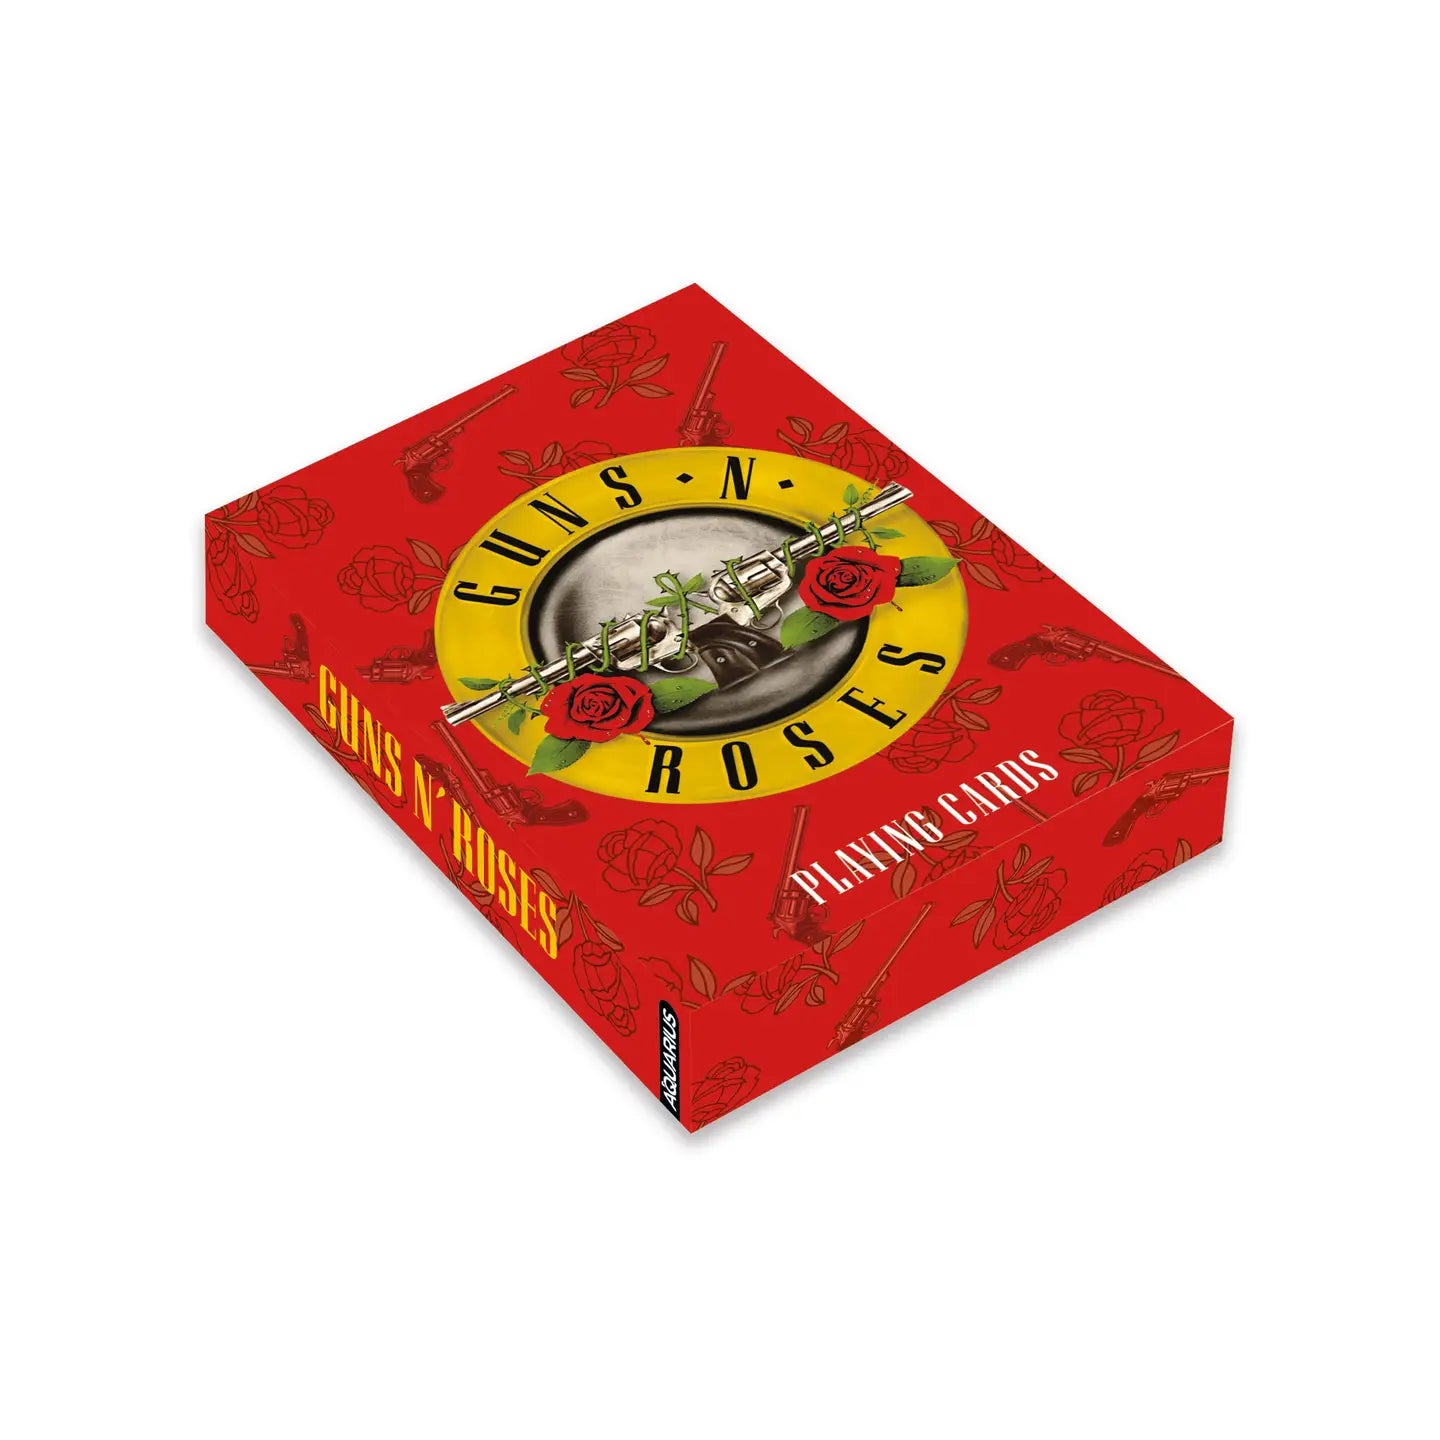 Guns N' Roses Playing Cards - Welcome to the Jungle!